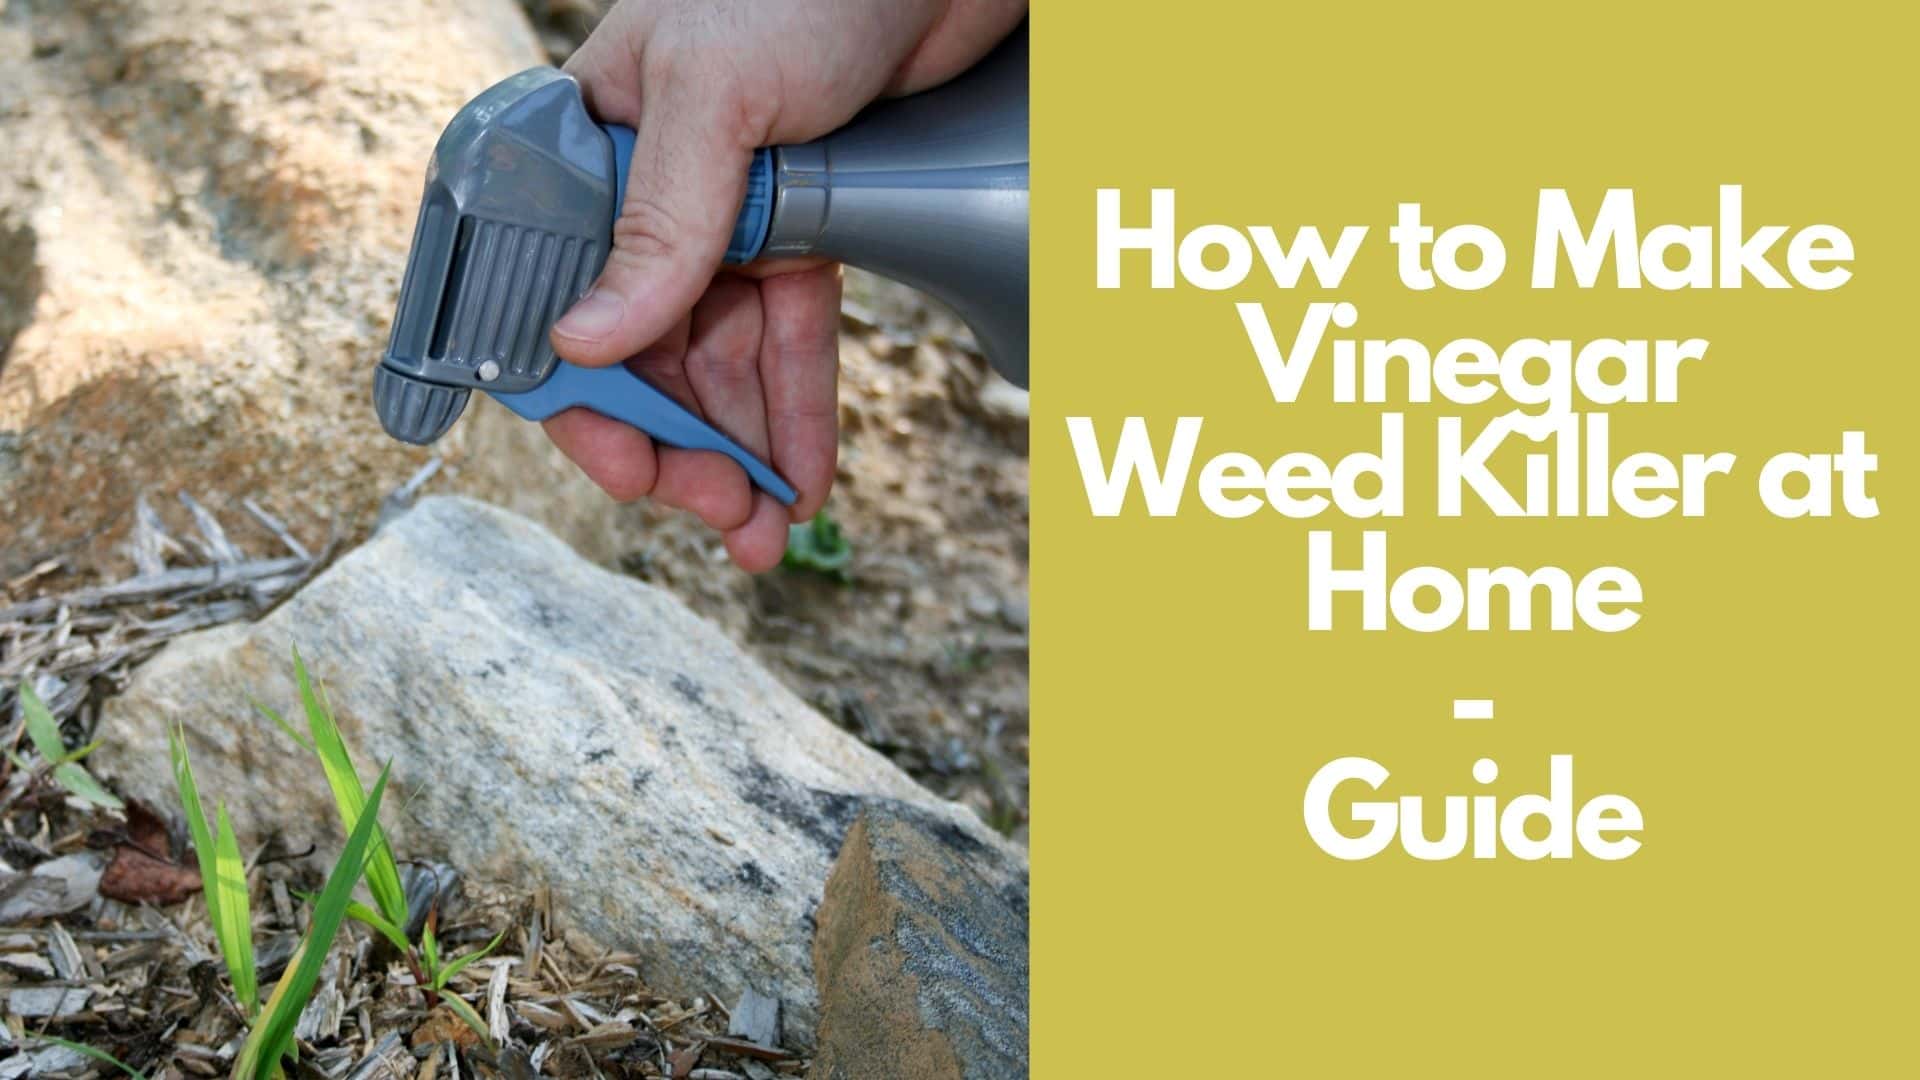 How to Make Vinegar Weed Killer at Home - Guide